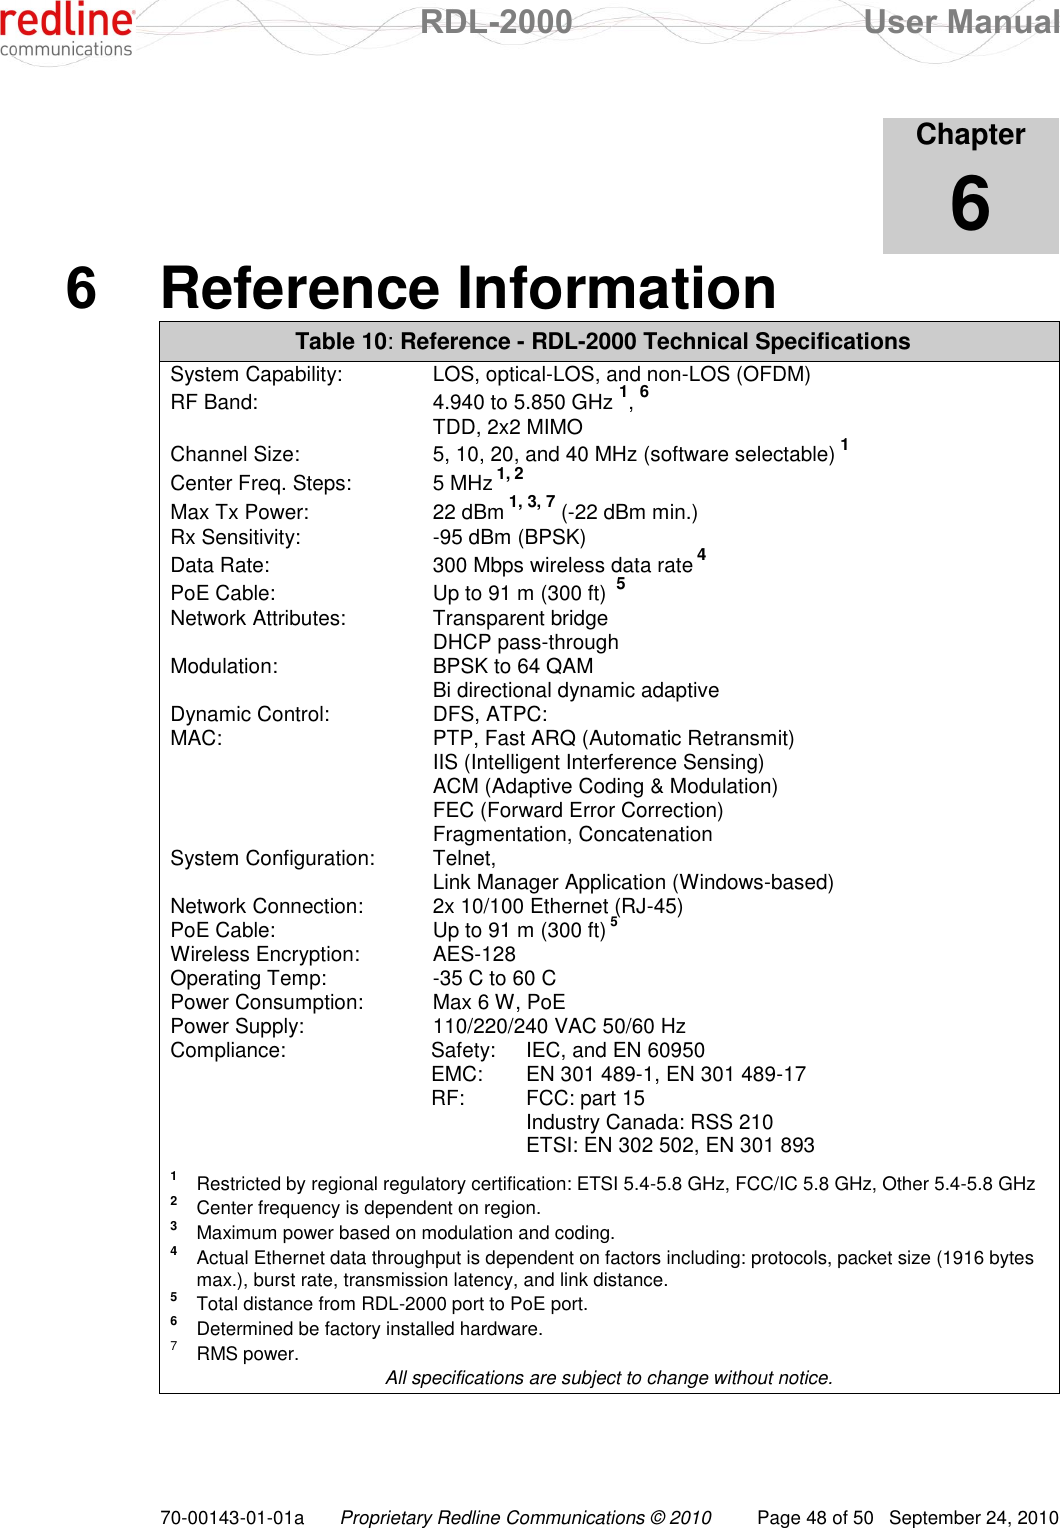  RDL-2000  User Manual 70-00143-01-01a Proprietary Redline Communications © 2010  Page 48 of 50  September 24, 2010            Chapter 6 6  Reference Information Table 10: Reference - RDL-2000 Technical Specifications System Capability:  LOS, optical-LOS, and non-LOS (OFDM) RF Band:  4.940 to 5.850 GHz 1, 6   TDD, 2x2 MIMO Channel Size:  5, 10, 20, and 40 MHz (software selectable) 1 Center Freq. Steps:  5 MHz 1, 2 Max Tx Power:  22 dBm 1, 3, 7 (-22 dBm min.) Rx Sensitivity:  -95 dBm (BPSK) Data Rate:  300 Mbps wireless data rate 4 PoE Cable:  Up to 91 m (300 ft)  5 Network Attributes:  Transparent bridge   DHCP pass-through Modulation:  BPSK to 64 QAM   Bi directional dynamic adaptive Dynamic Control:  DFS, ATPC: MAC:  PTP, Fast ARQ (Automatic Retransmit)   IIS (Intelligent Interference Sensing)   ACM (Adaptive Coding &amp; Modulation)   FEC (Forward Error Correction)   Fragmentation, Concatenation System Configuration:  Telnet,   Link Manager Application (Windows-based) Network Connection:  2x 10/100 Ethernet (RJ-45) PoE Cable:  Up to 91 m (300 ft) 5 Wireless Encryption:  AES-128  Operating Temp:  -35 C to 60 C Power Consumption:  Max 6 W, PoE Power Supply:  110/220/240 VAC 50/60 Hz Compliance:  Safety:  IEC, and EN 60950   EMC:  EN 301 489-1, EN 301 489-17   RF:  FCC: part 15     Industry Canada: RSS 210     ETSI: EN 302 502, EN 301 893  1  Restricted by regional regulatory certification: ETSI 5.4-5.8 GHz, FCC/IC 5.8 GHz, Other 5.4-5.8 GHz 2  Center frequency is dependent on region. 3   Maximum power based on modulation and coding. 4  Actual Ethernet data throughput is dependent on factors including: protocols, packet size (1916 bytes max.), burst rate, transmission latency, and link distance. 5  Total distance from RDL-2000 port to PoE port. 6  Determined be factory installed hardware. 7  RMS power. All specifications are subject to change without notice.     